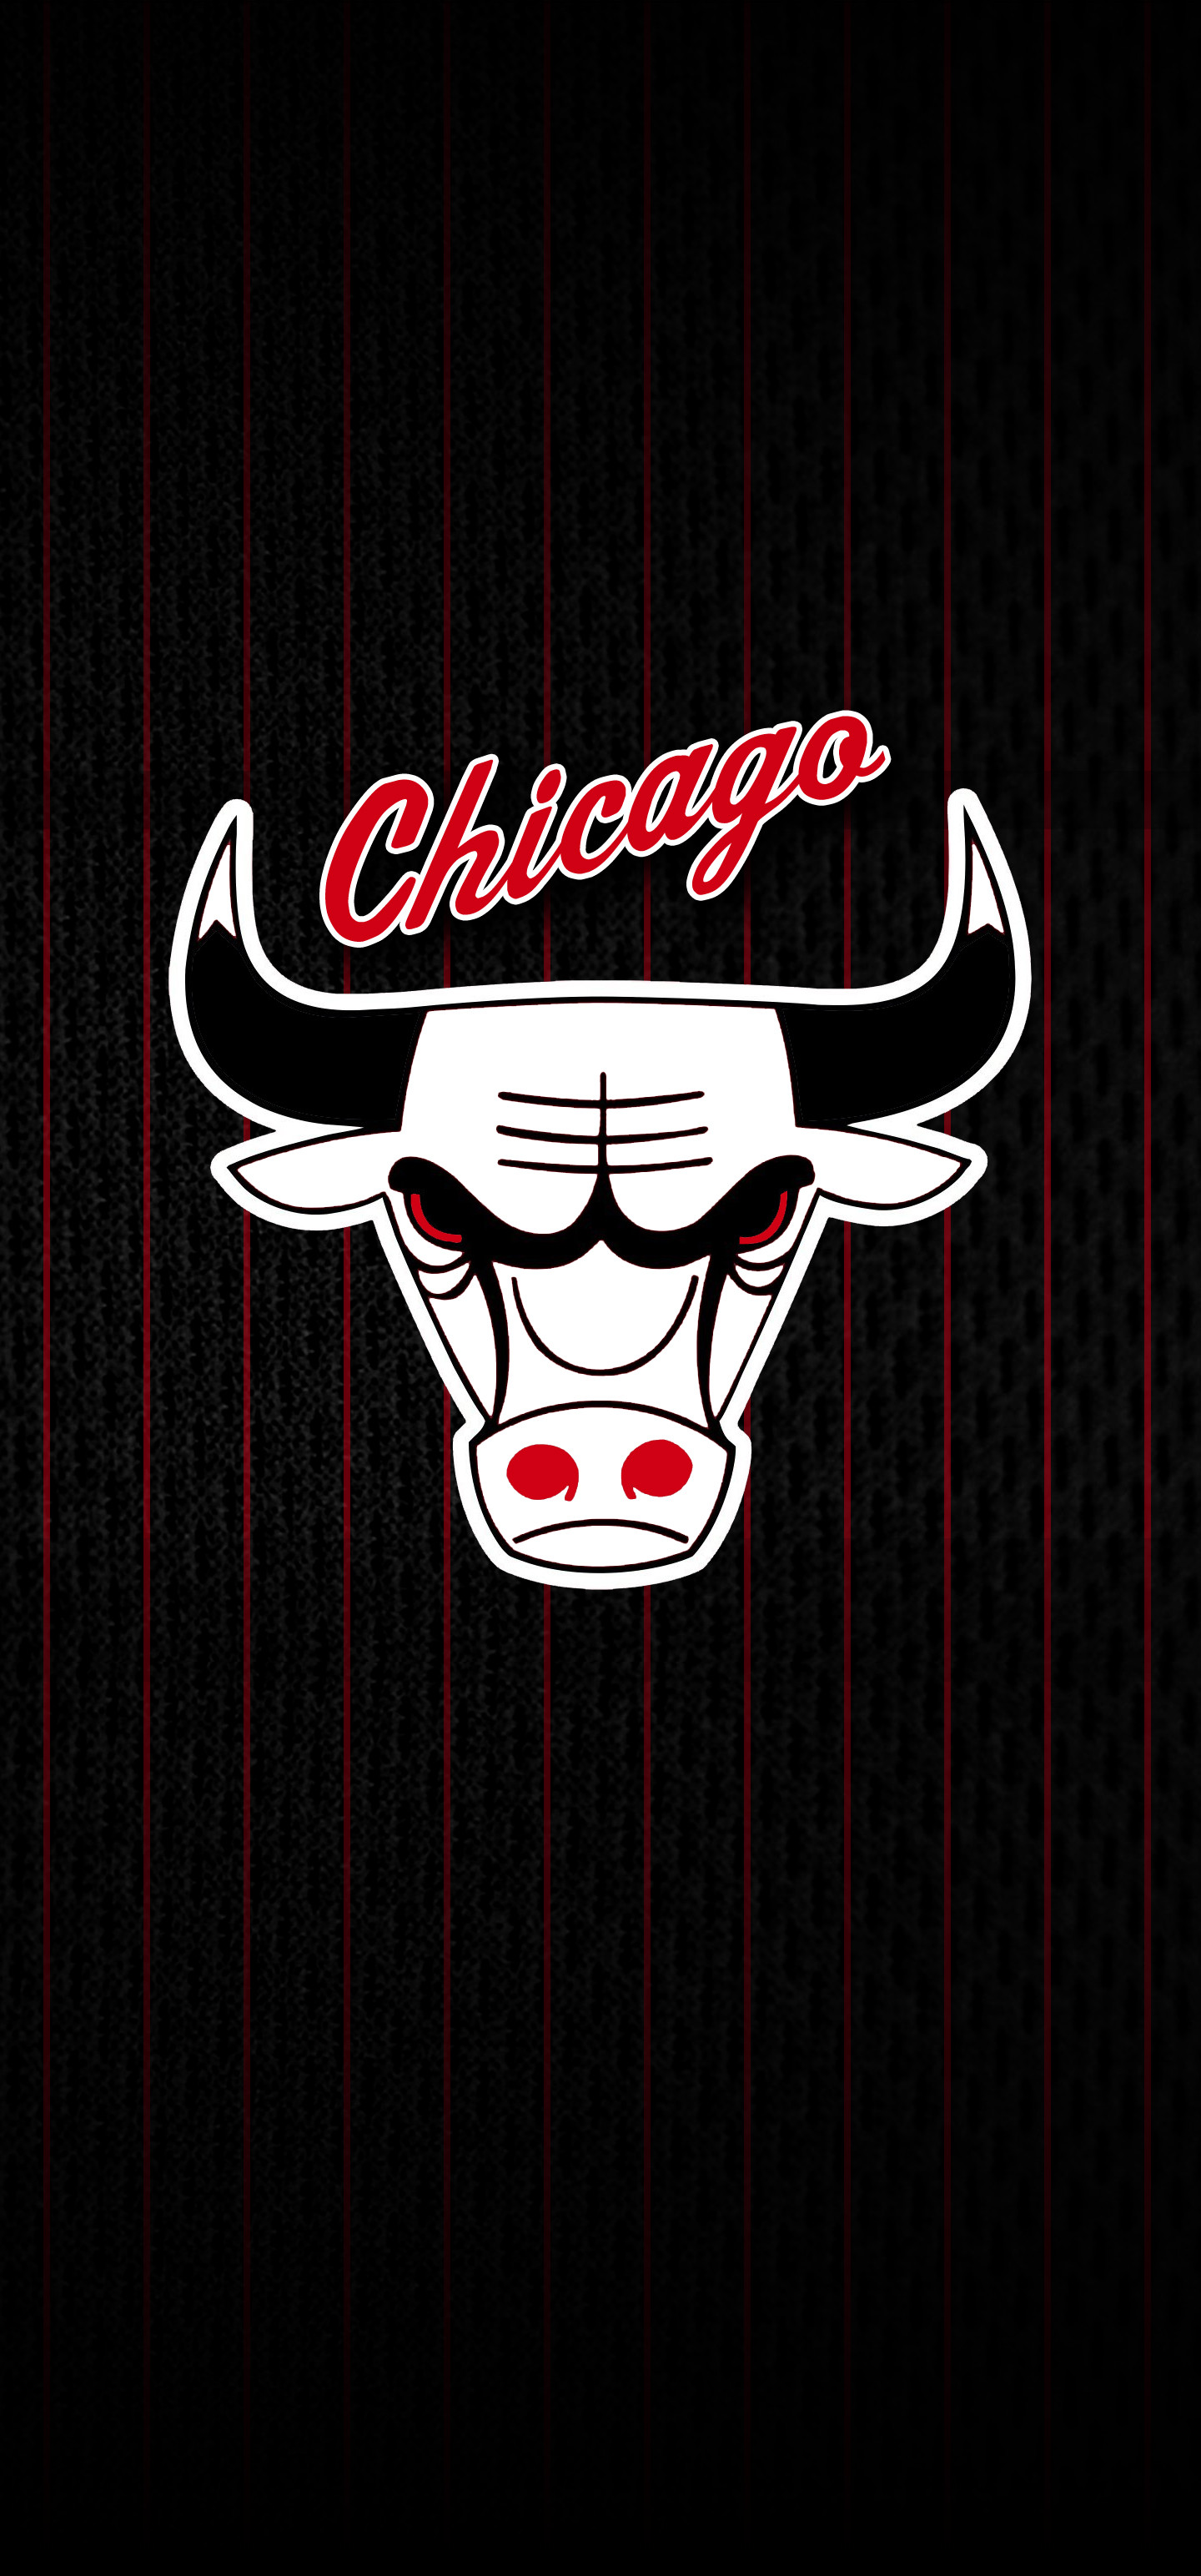 All New Bulls Wallpaper, Chicago, Cook County, United States of America